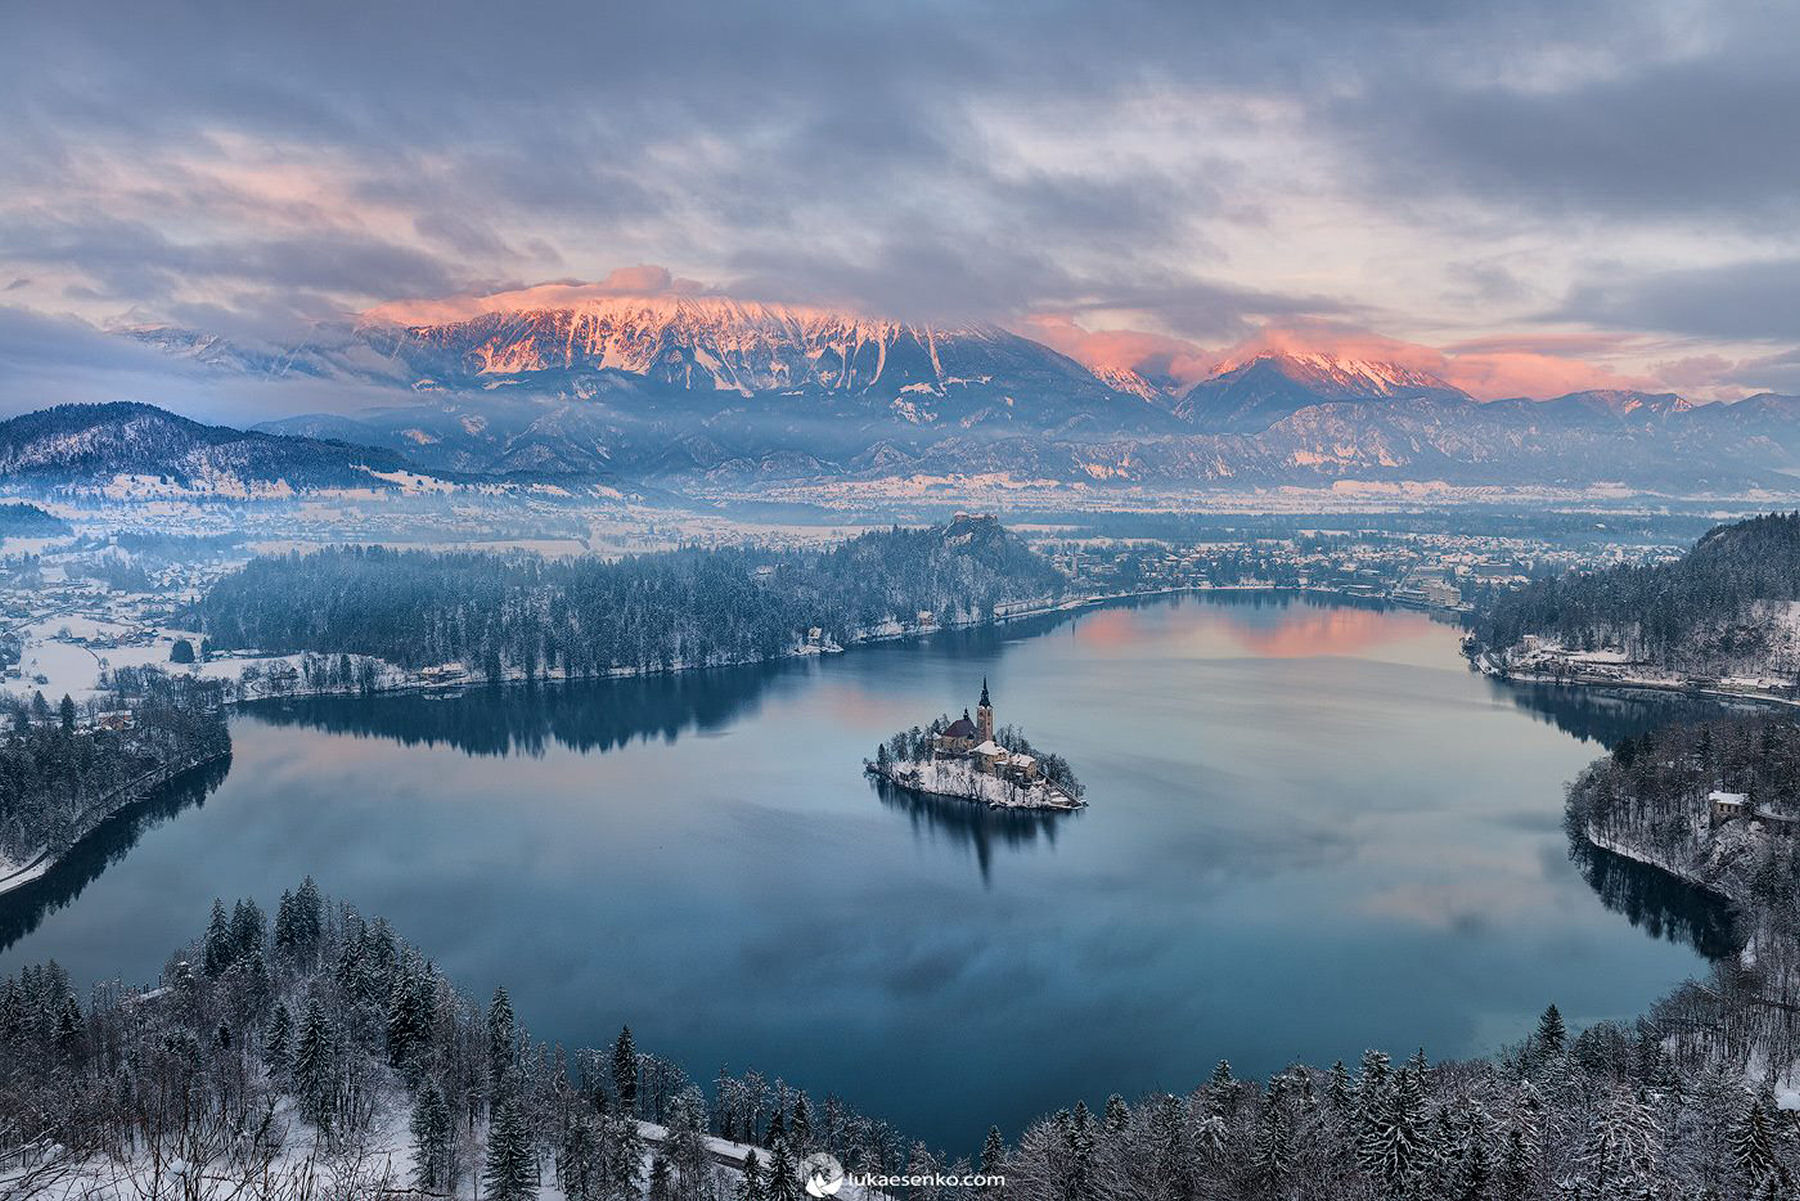 bled in slovenia is beautiful in winter with the scenery of snow